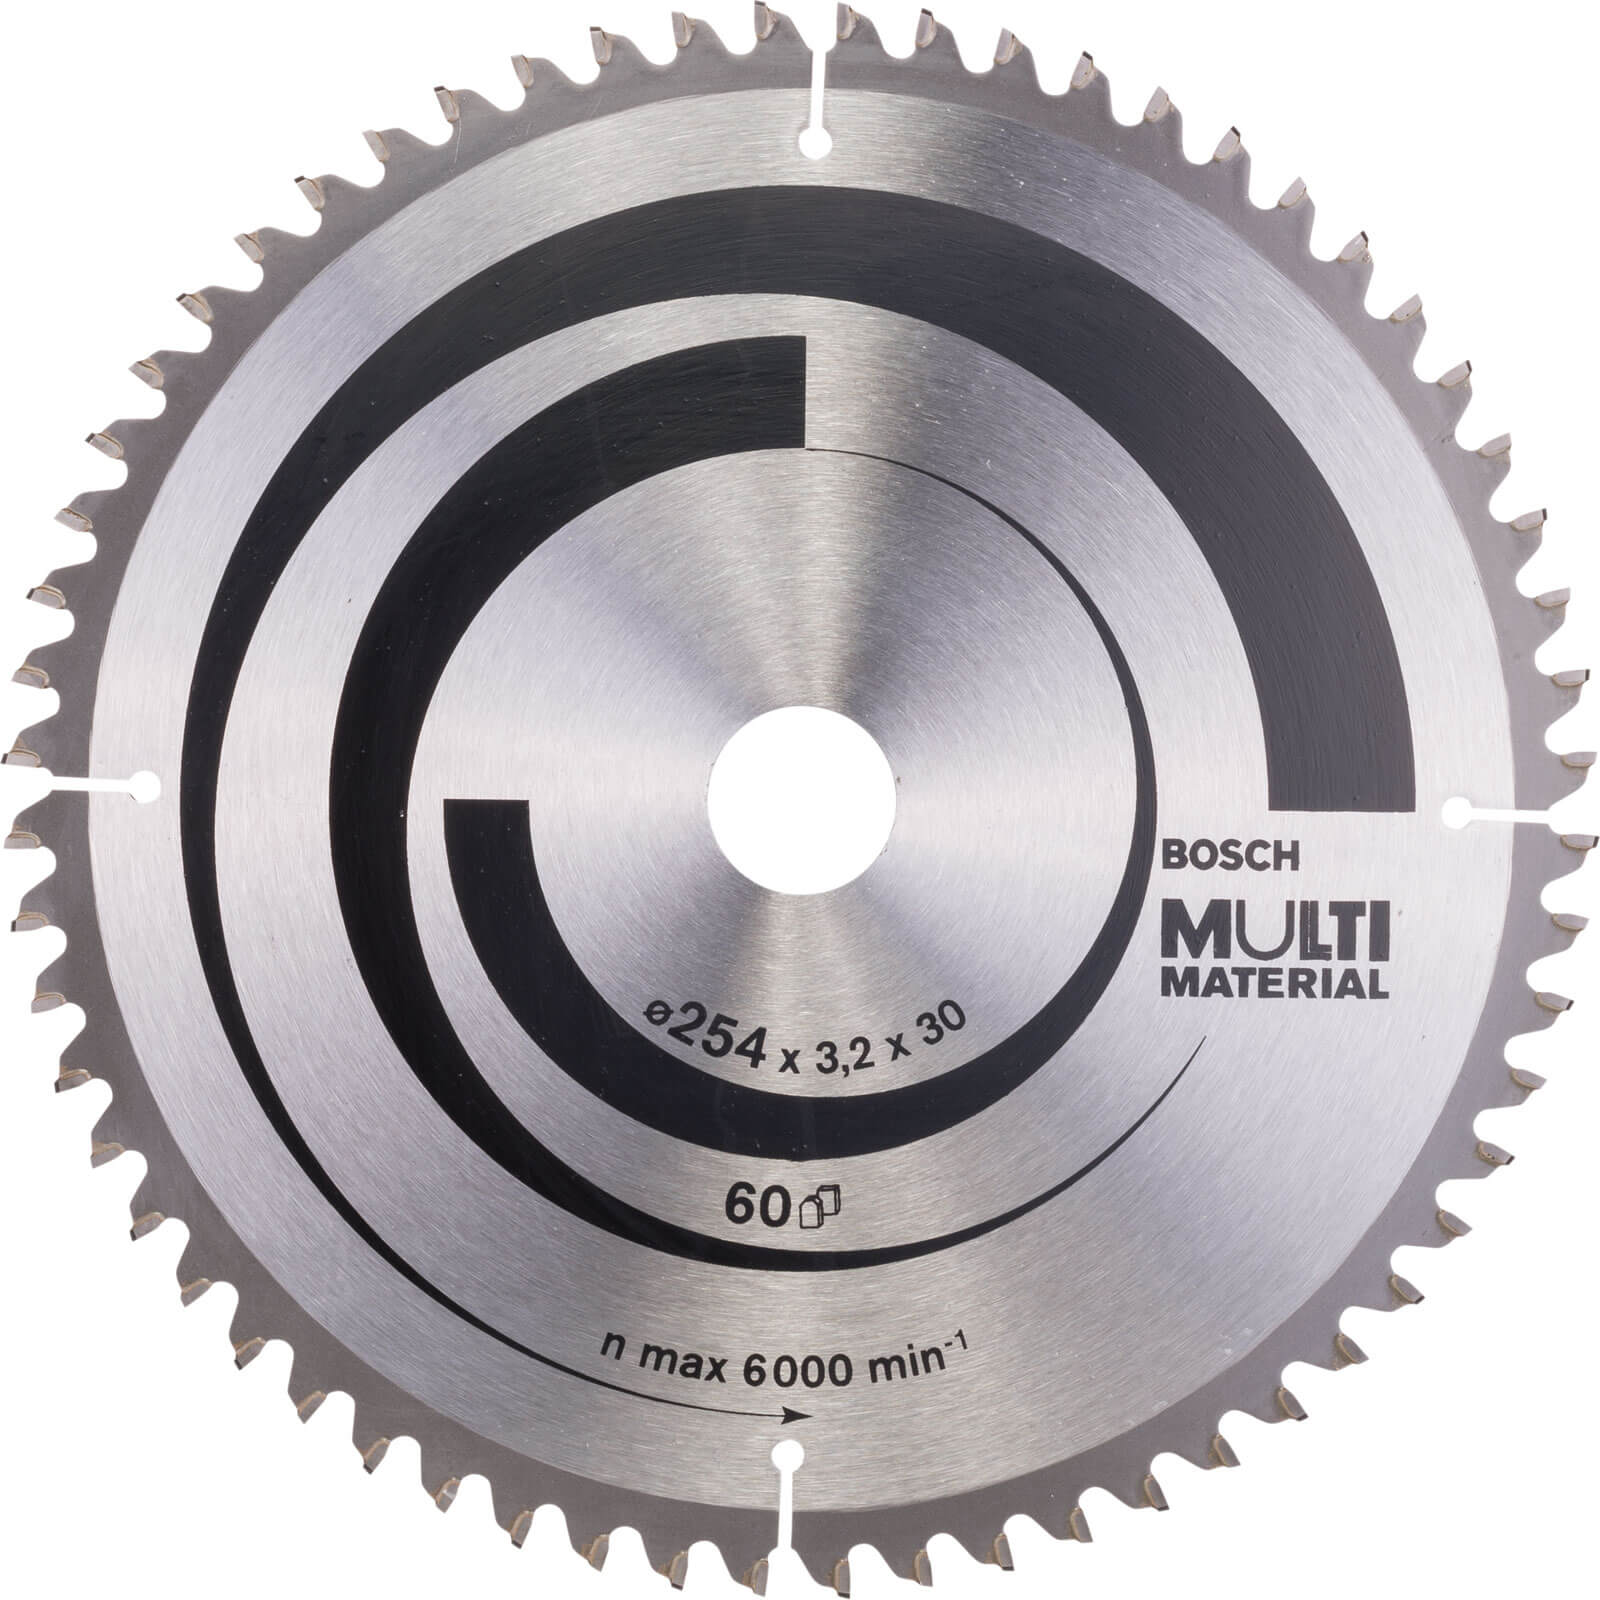 Photo of Bosch Multi Material Cutting Mitre And Table Saw Blade 254mm 60t 30mm